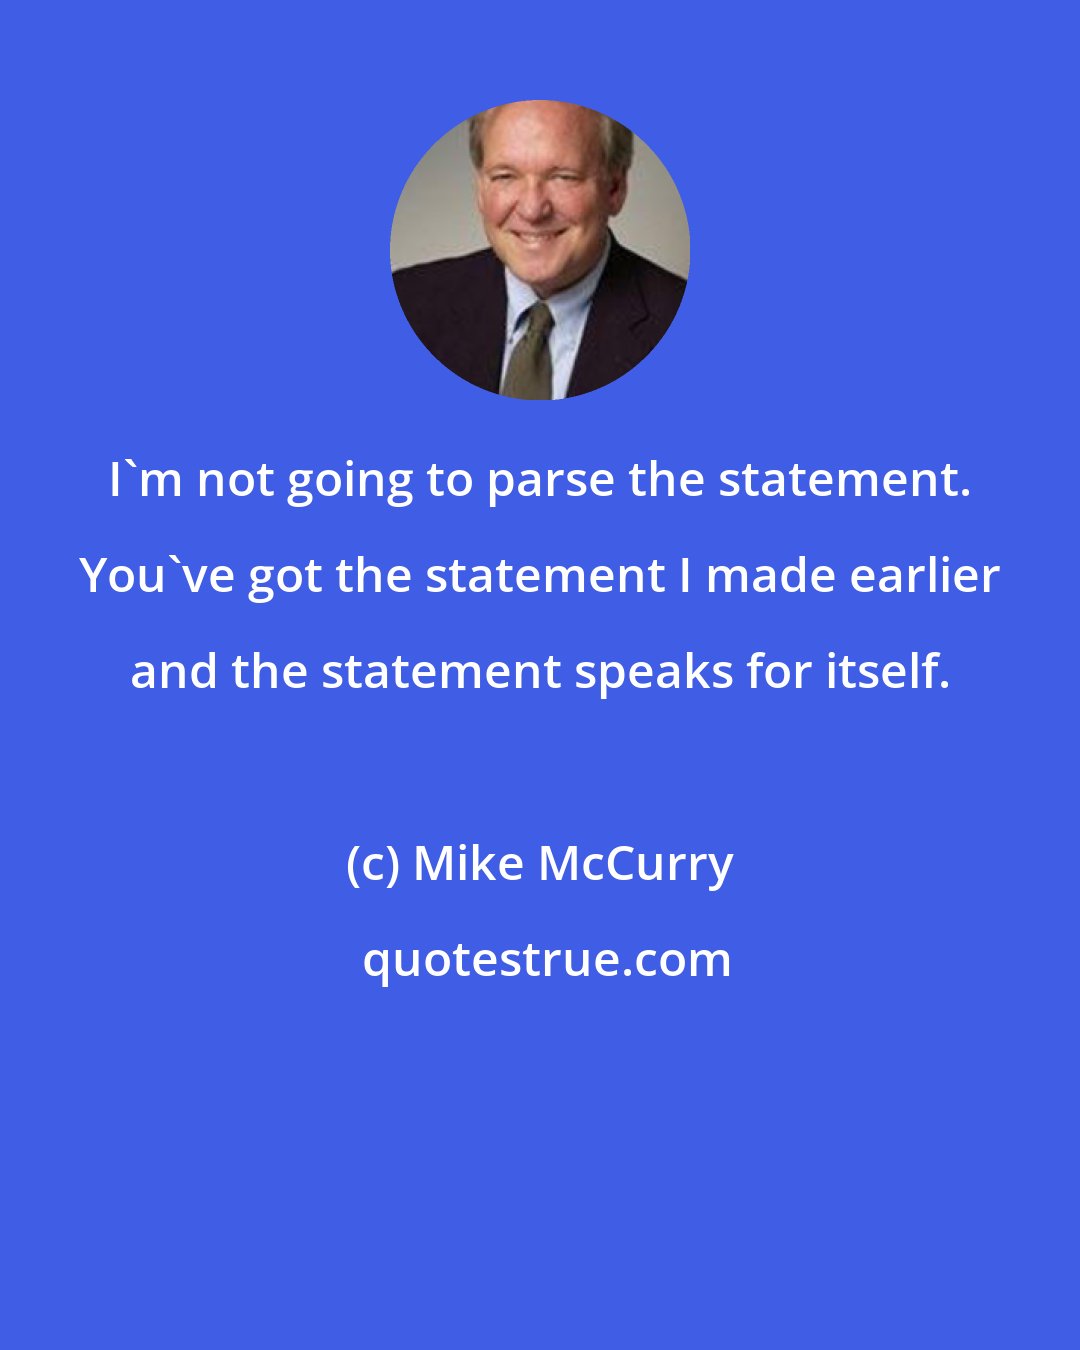 Mike McCurry: I'm not going to parse the statement. You've got the statement I made earlier and the statement speaks for itself.